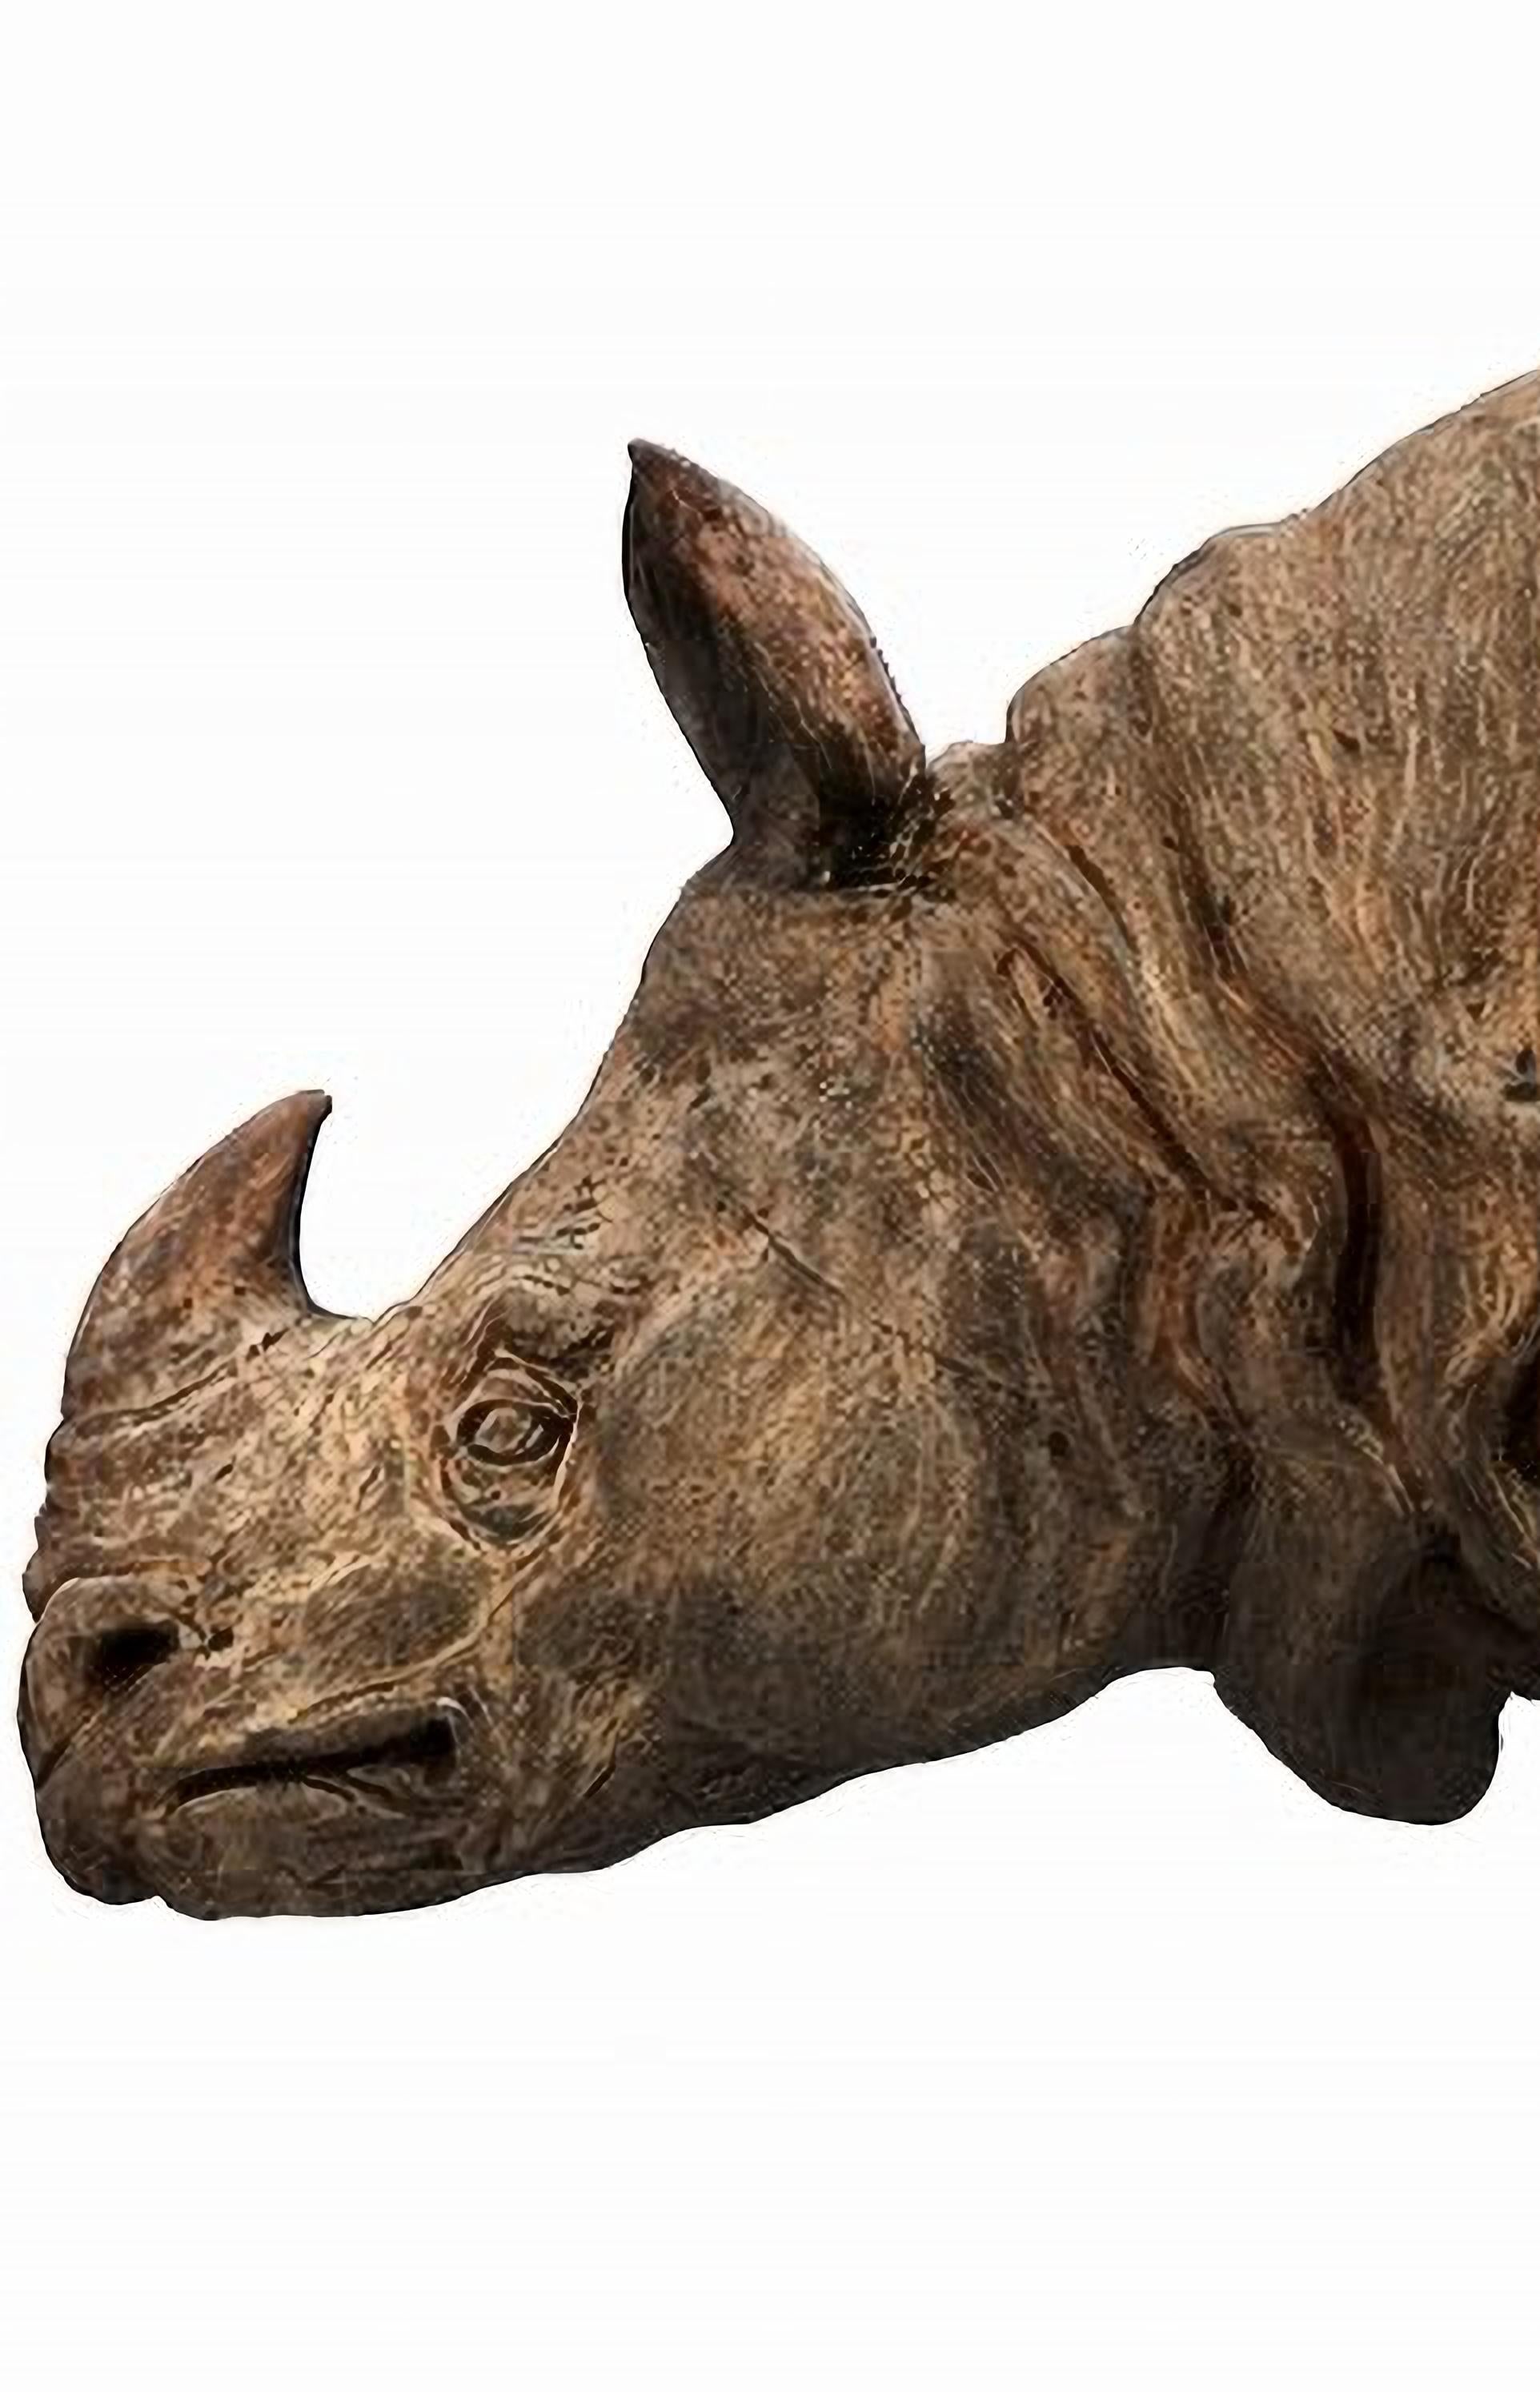 Italian THE INDIAN TUSCANY TERRACOTTA RHINO FROM ASSAM 20th Century For Sale